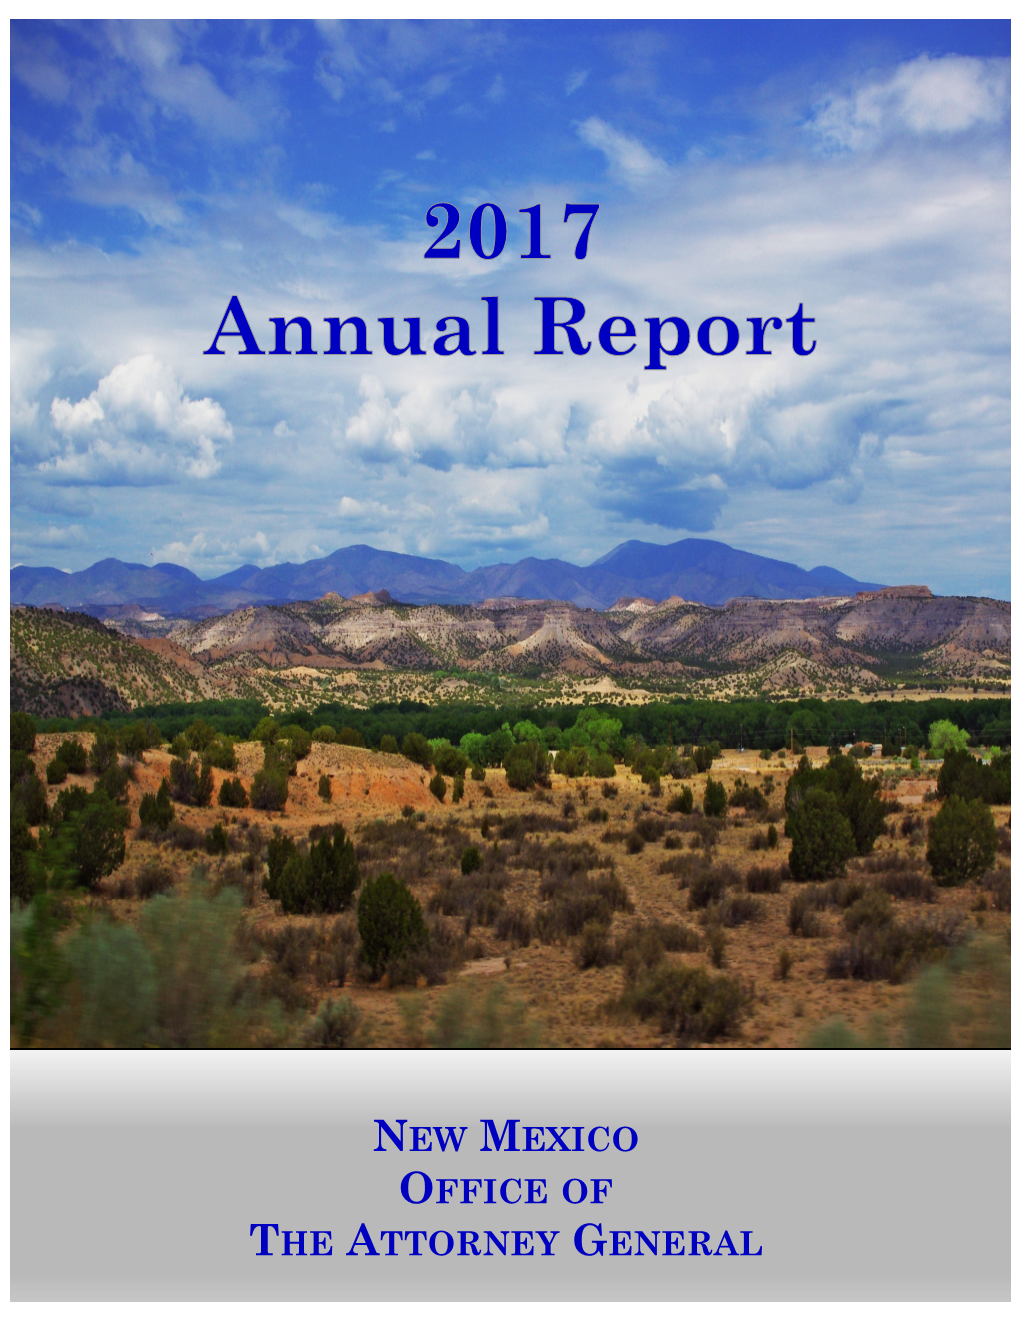 New Mexico Office of the Attorney General Annual Report 2017